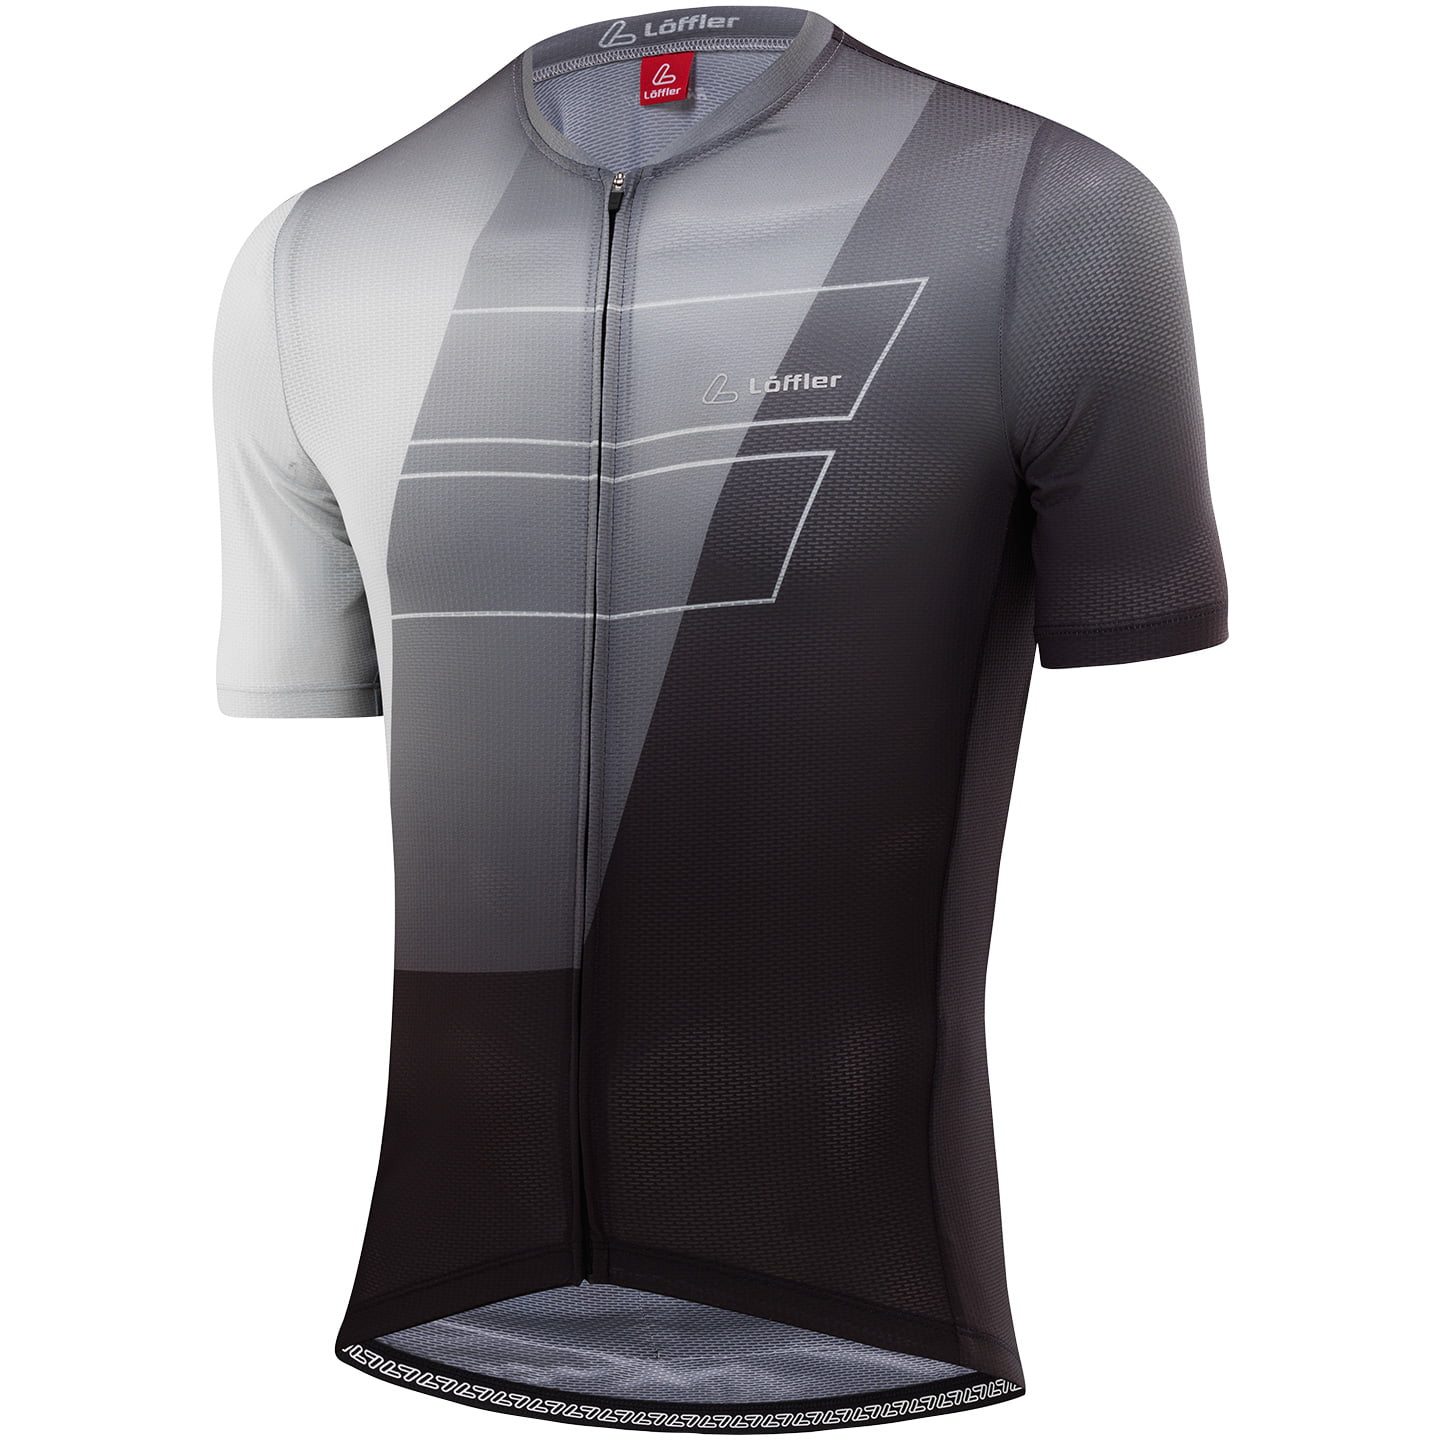 LOFFLER Vent Short Sleeve Jersey Short Sleeve Jersey, for men, size S, Cycling jersey, Cycling clothing